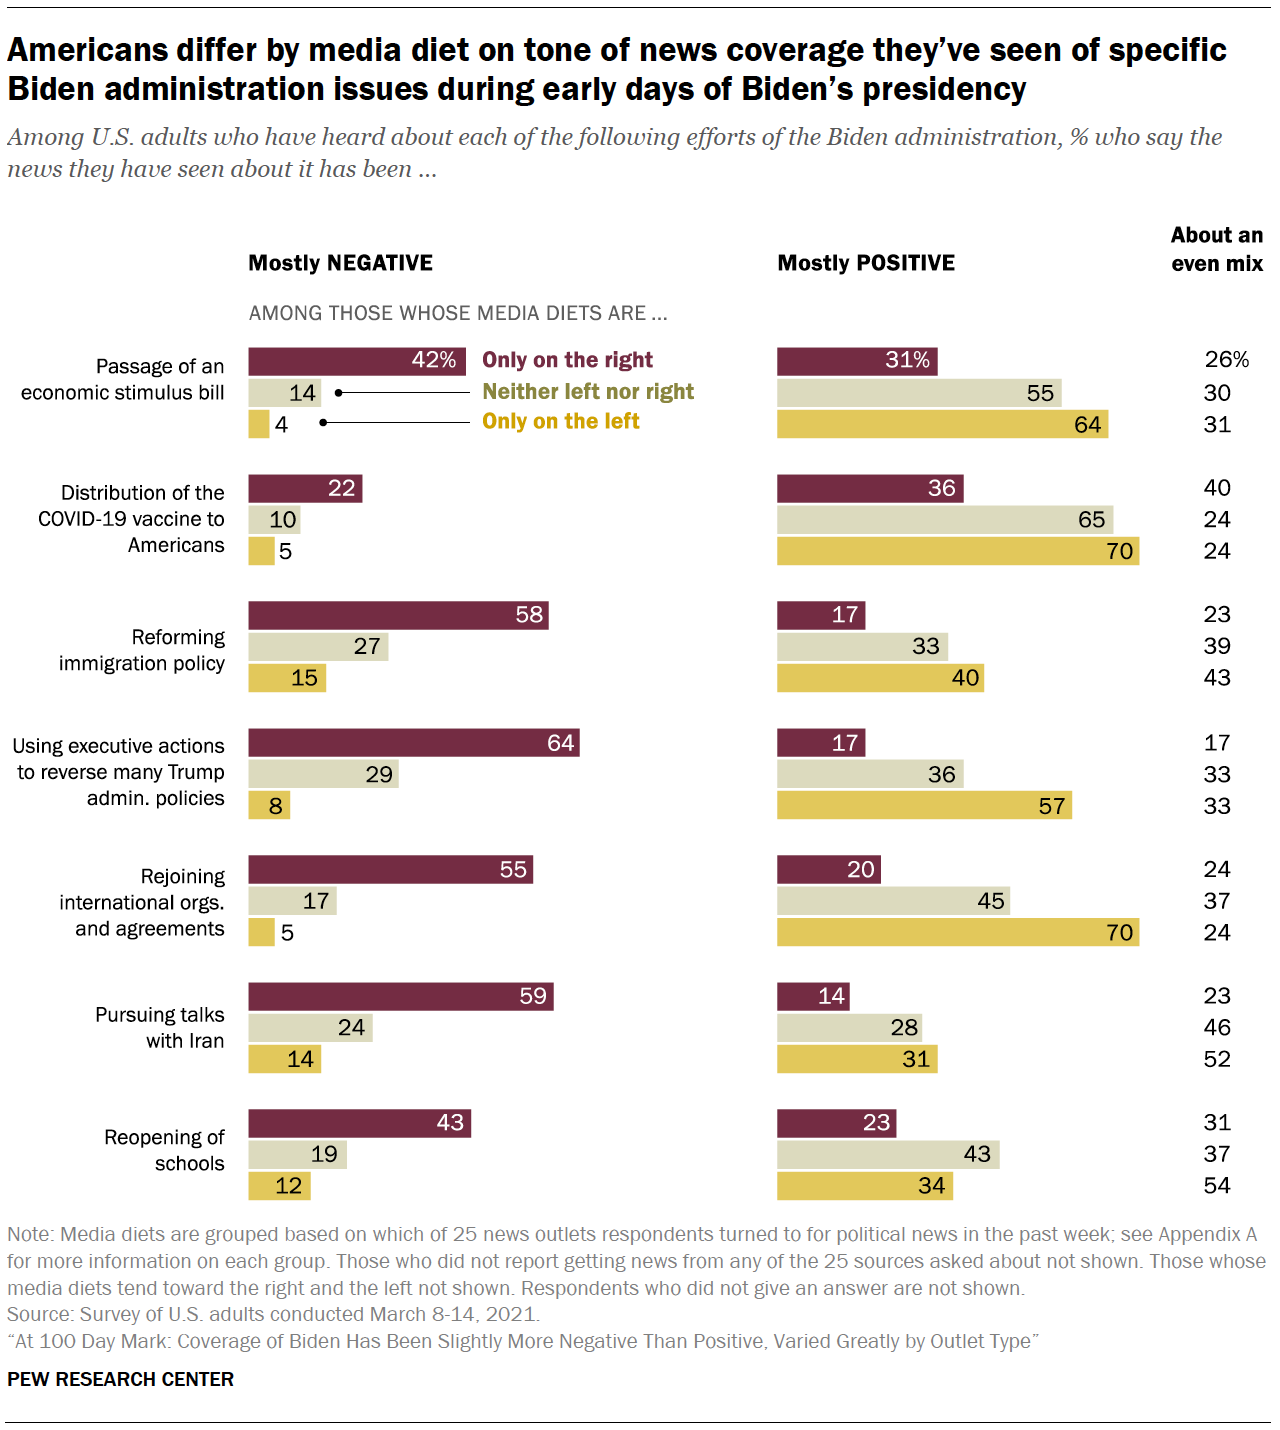 Americans differ by media diet on tone of news coverage they’ve seen of specific Biden administration issues during early days of Biden’s presidency